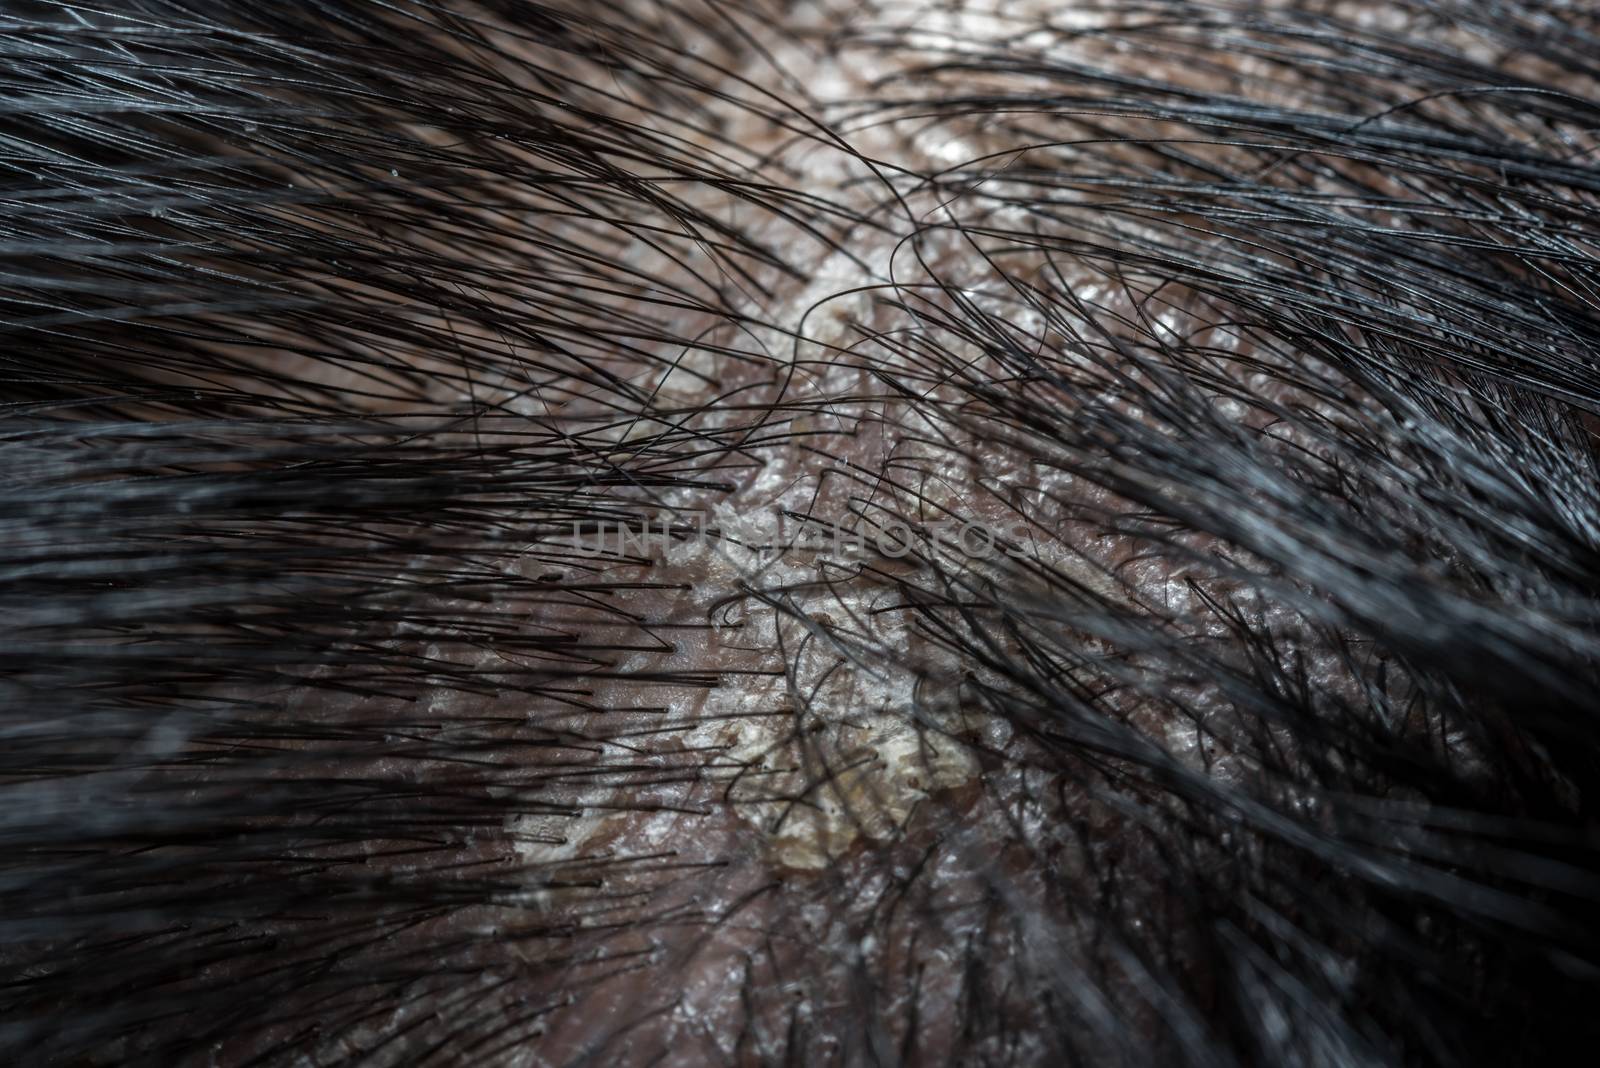 Hair scalp with dandruff and scaly from psoriasis by PongMoji